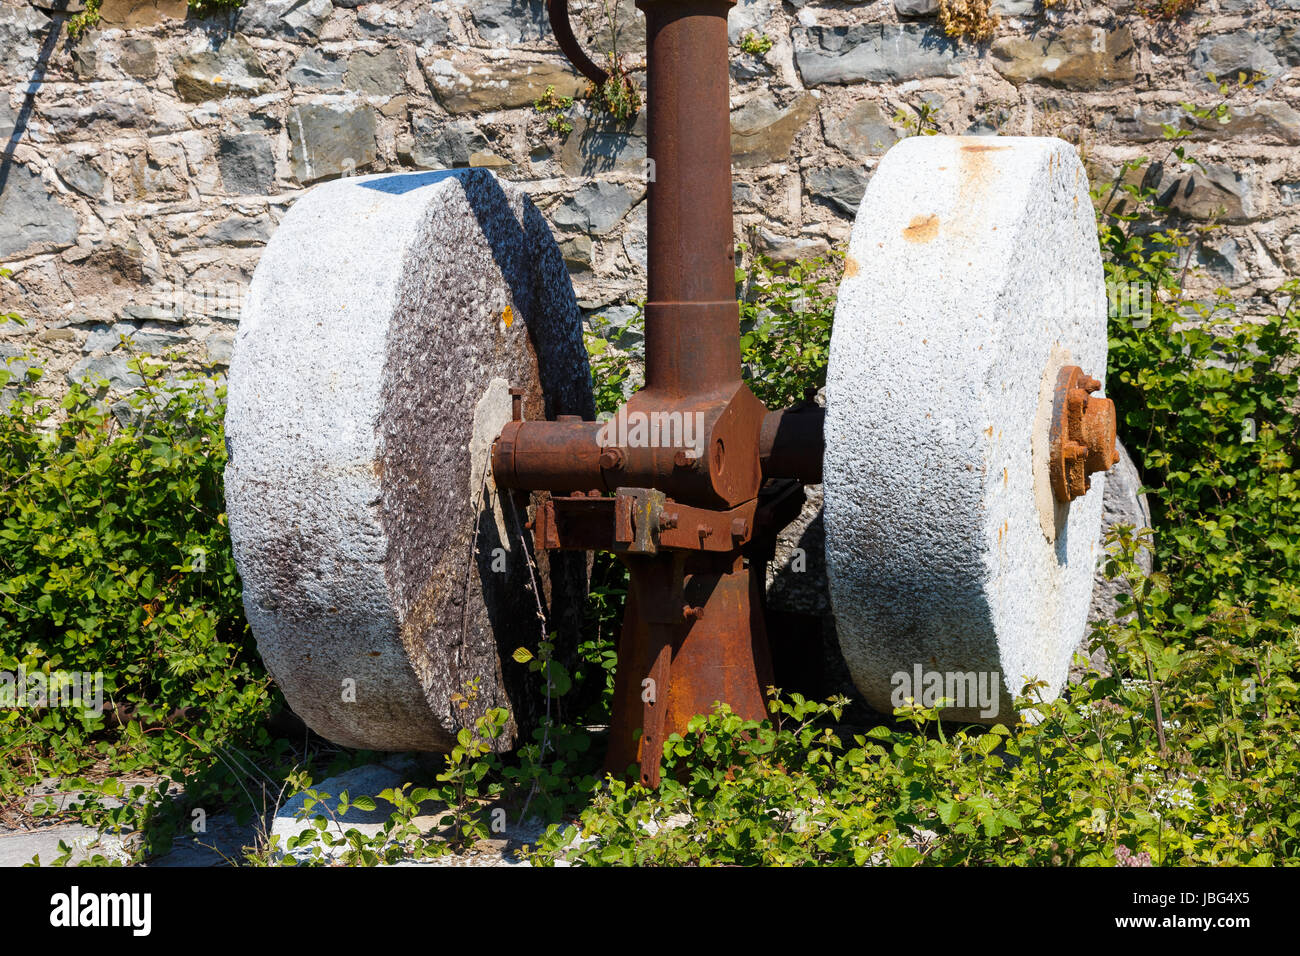 An old olive press with two millstones used for olive oil production in Greece.  People have used olive presses since Greeks first began pressing oliv Stock Photo